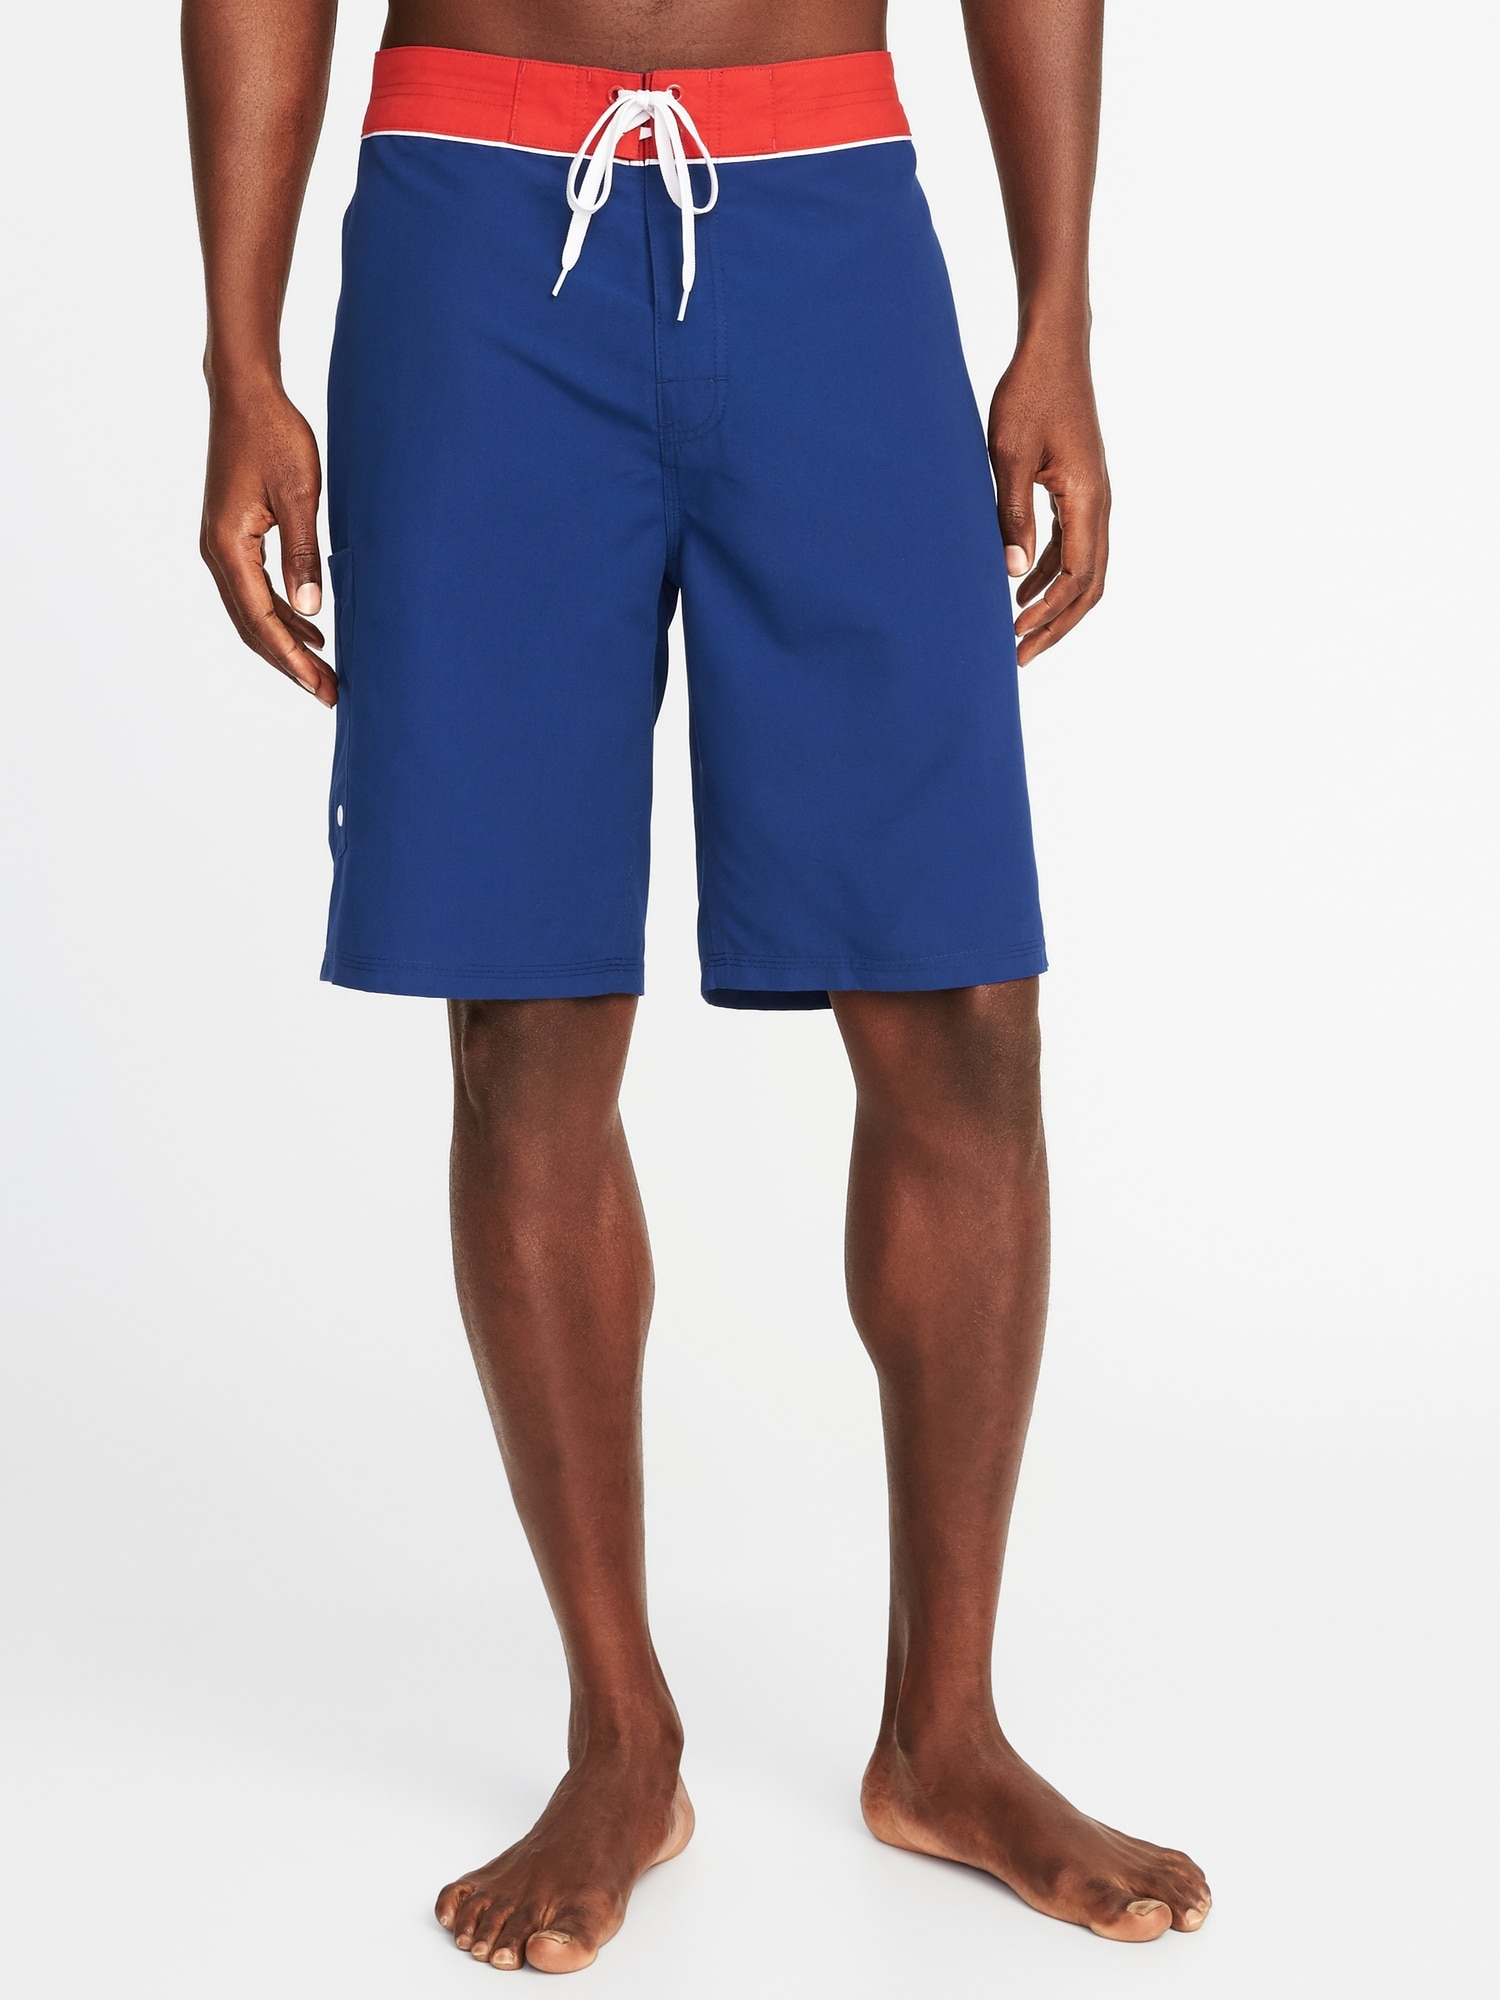 Board Shorts for Men - 10-inch inseam | Old Navy